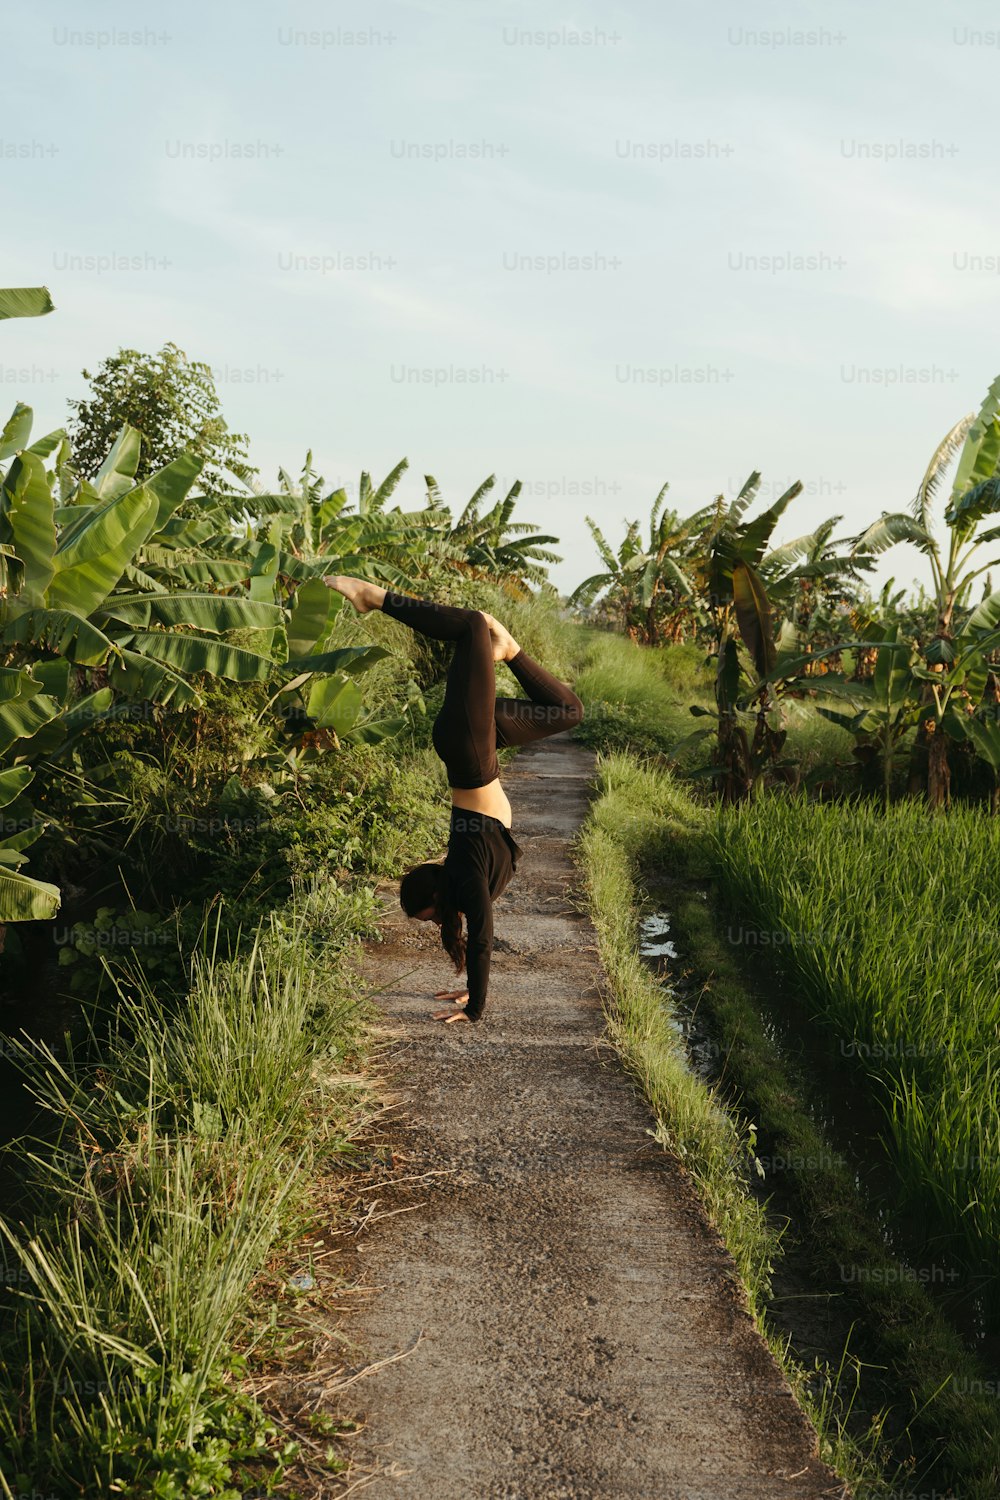 a woman is doing a handstand on a dirt road